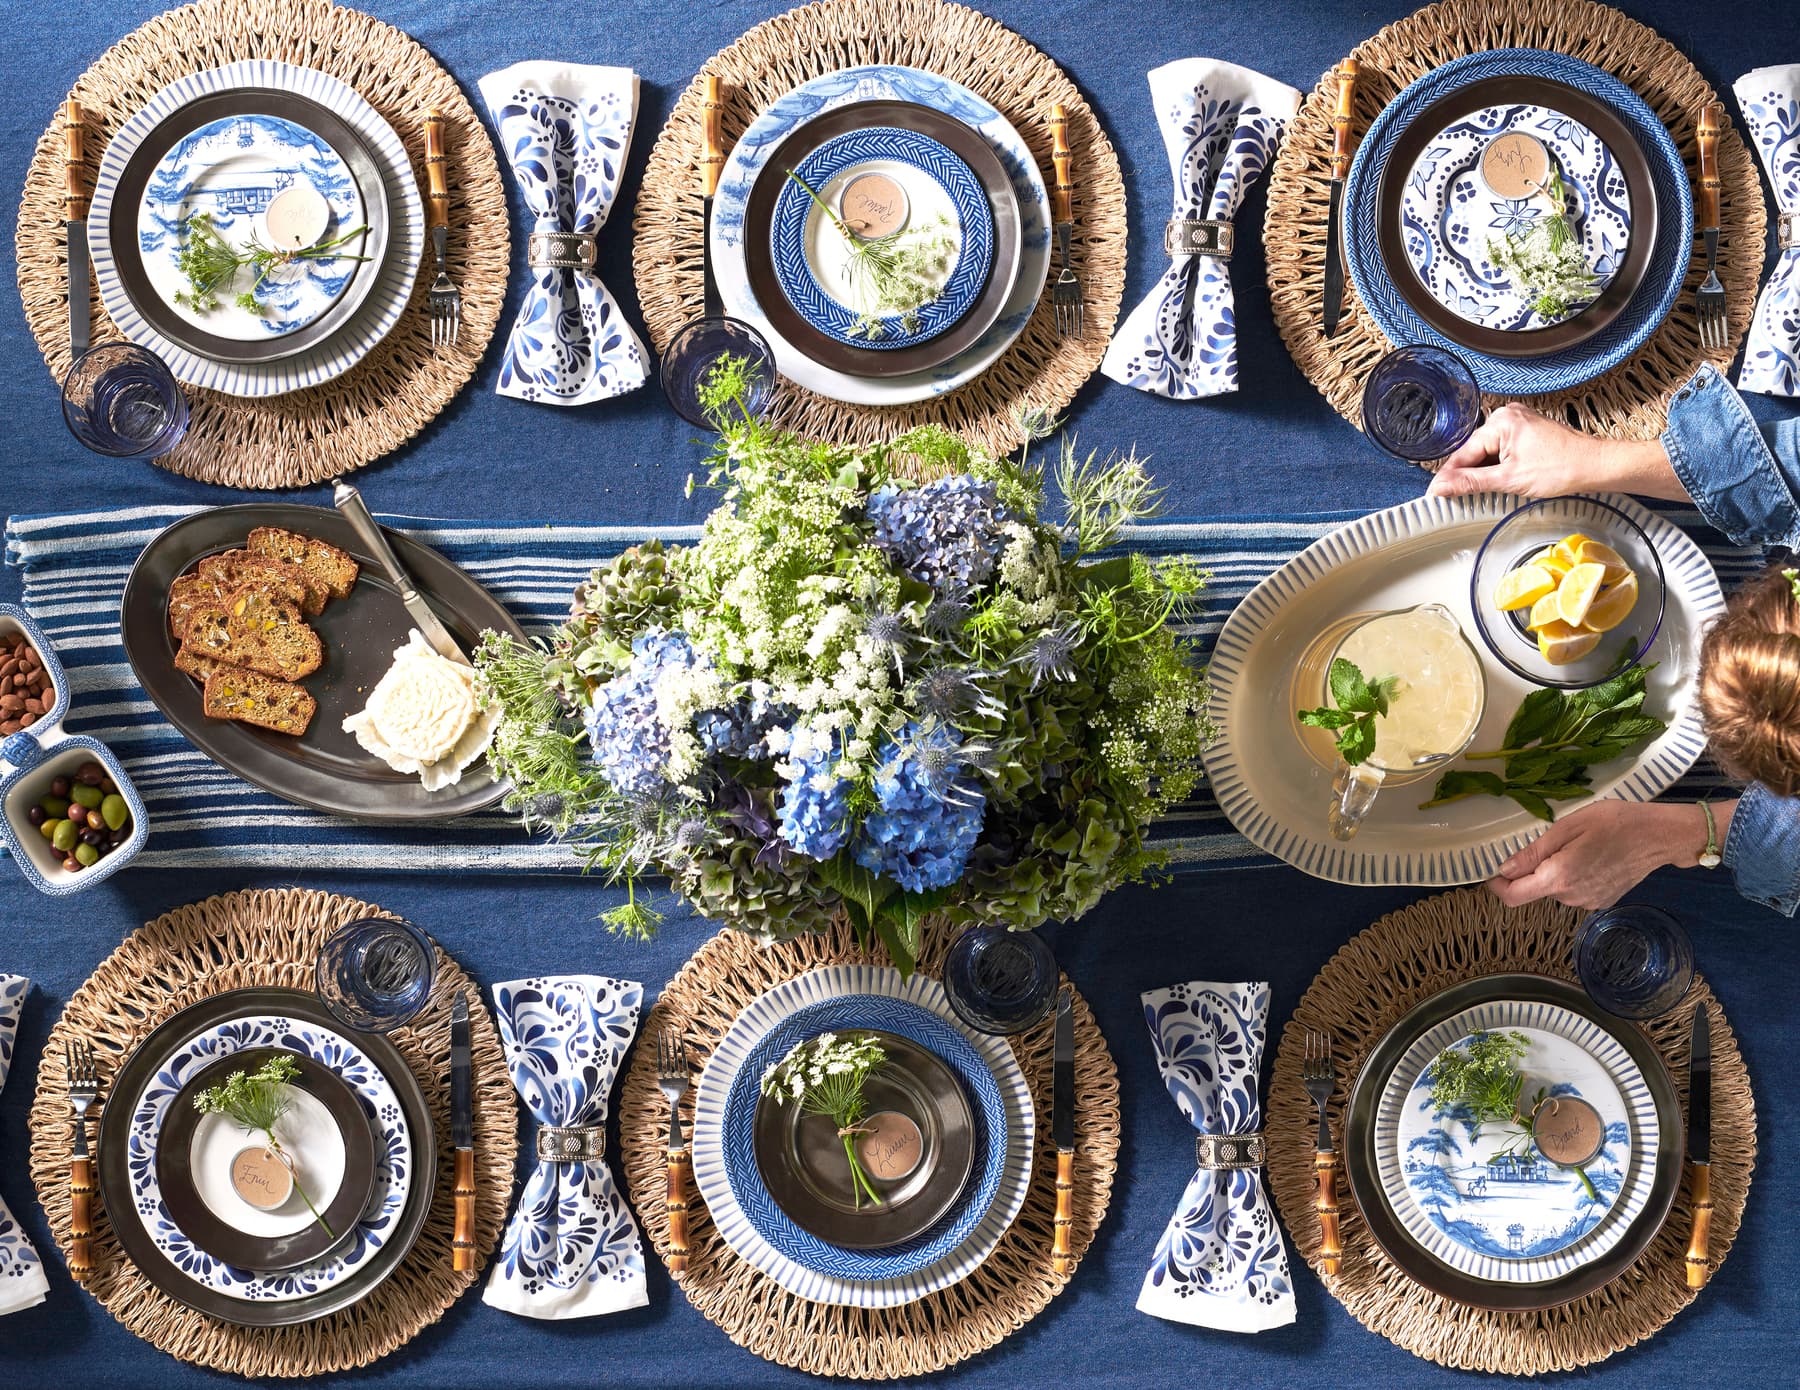 Mix and match your dinnerware to create a beautiful setting.